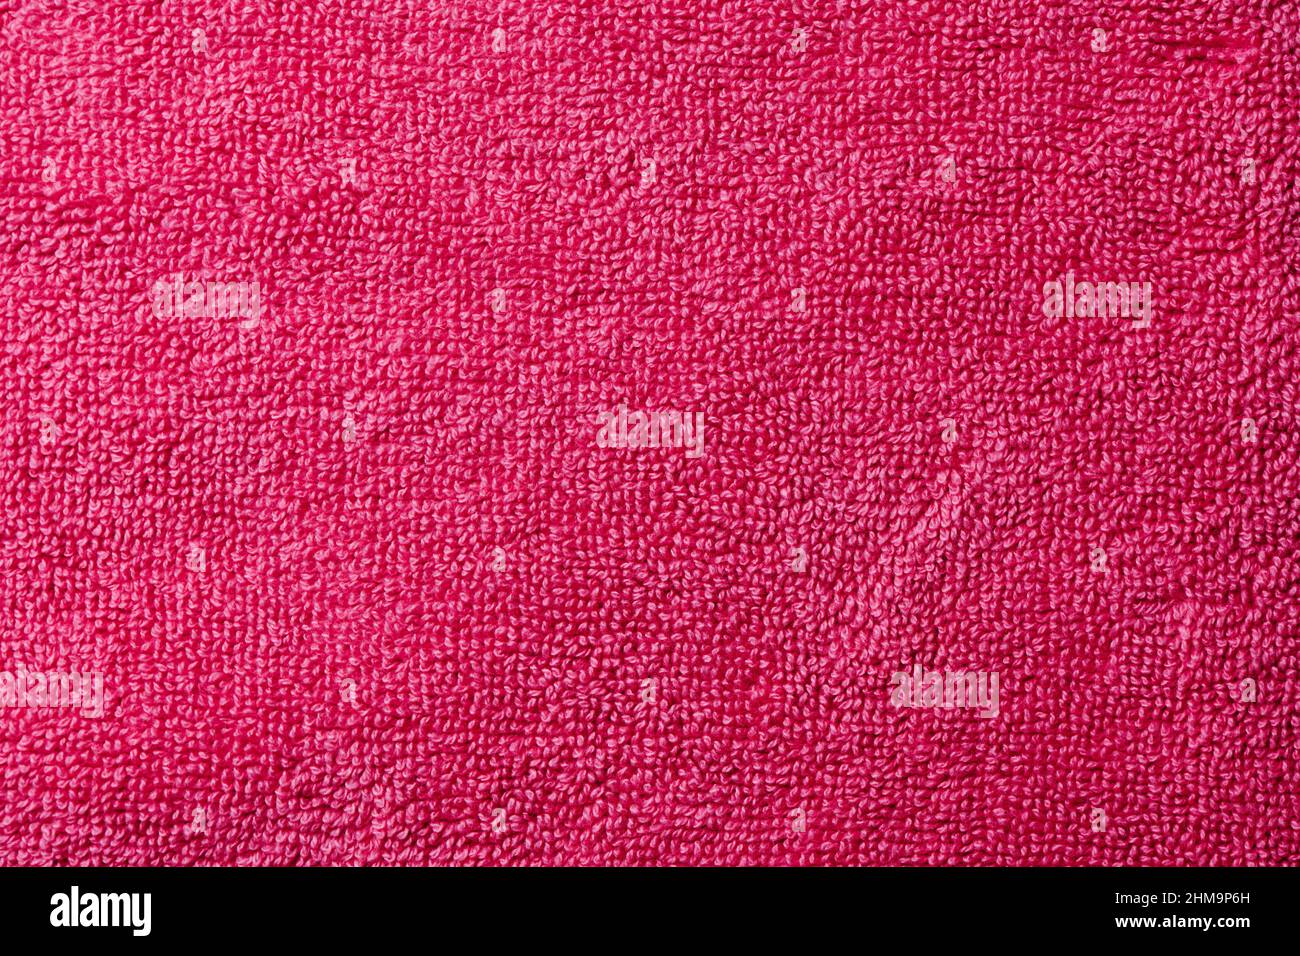 closeup of a red purple or fuchsia terrycloth fabric to be used as a background Stock Photo